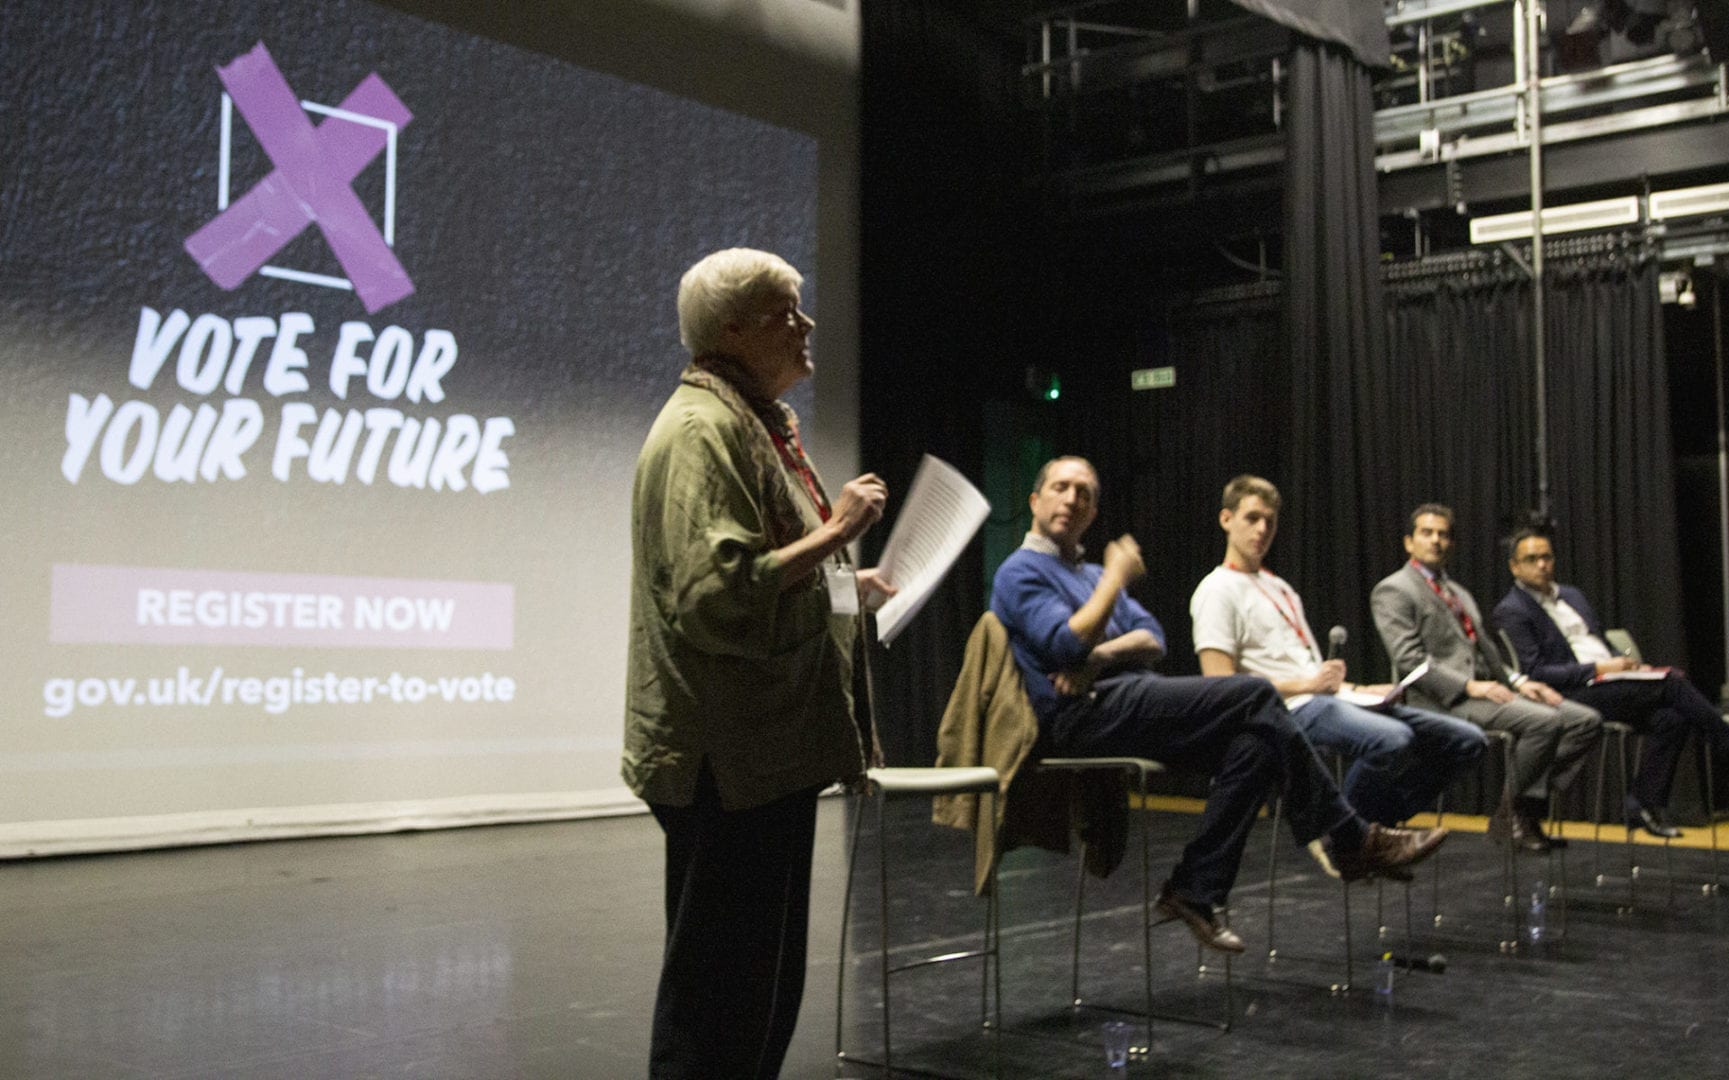 A political candidate speaks to students at a general election hustings event at Westminster Kingsway College, on 19 Nov 2019